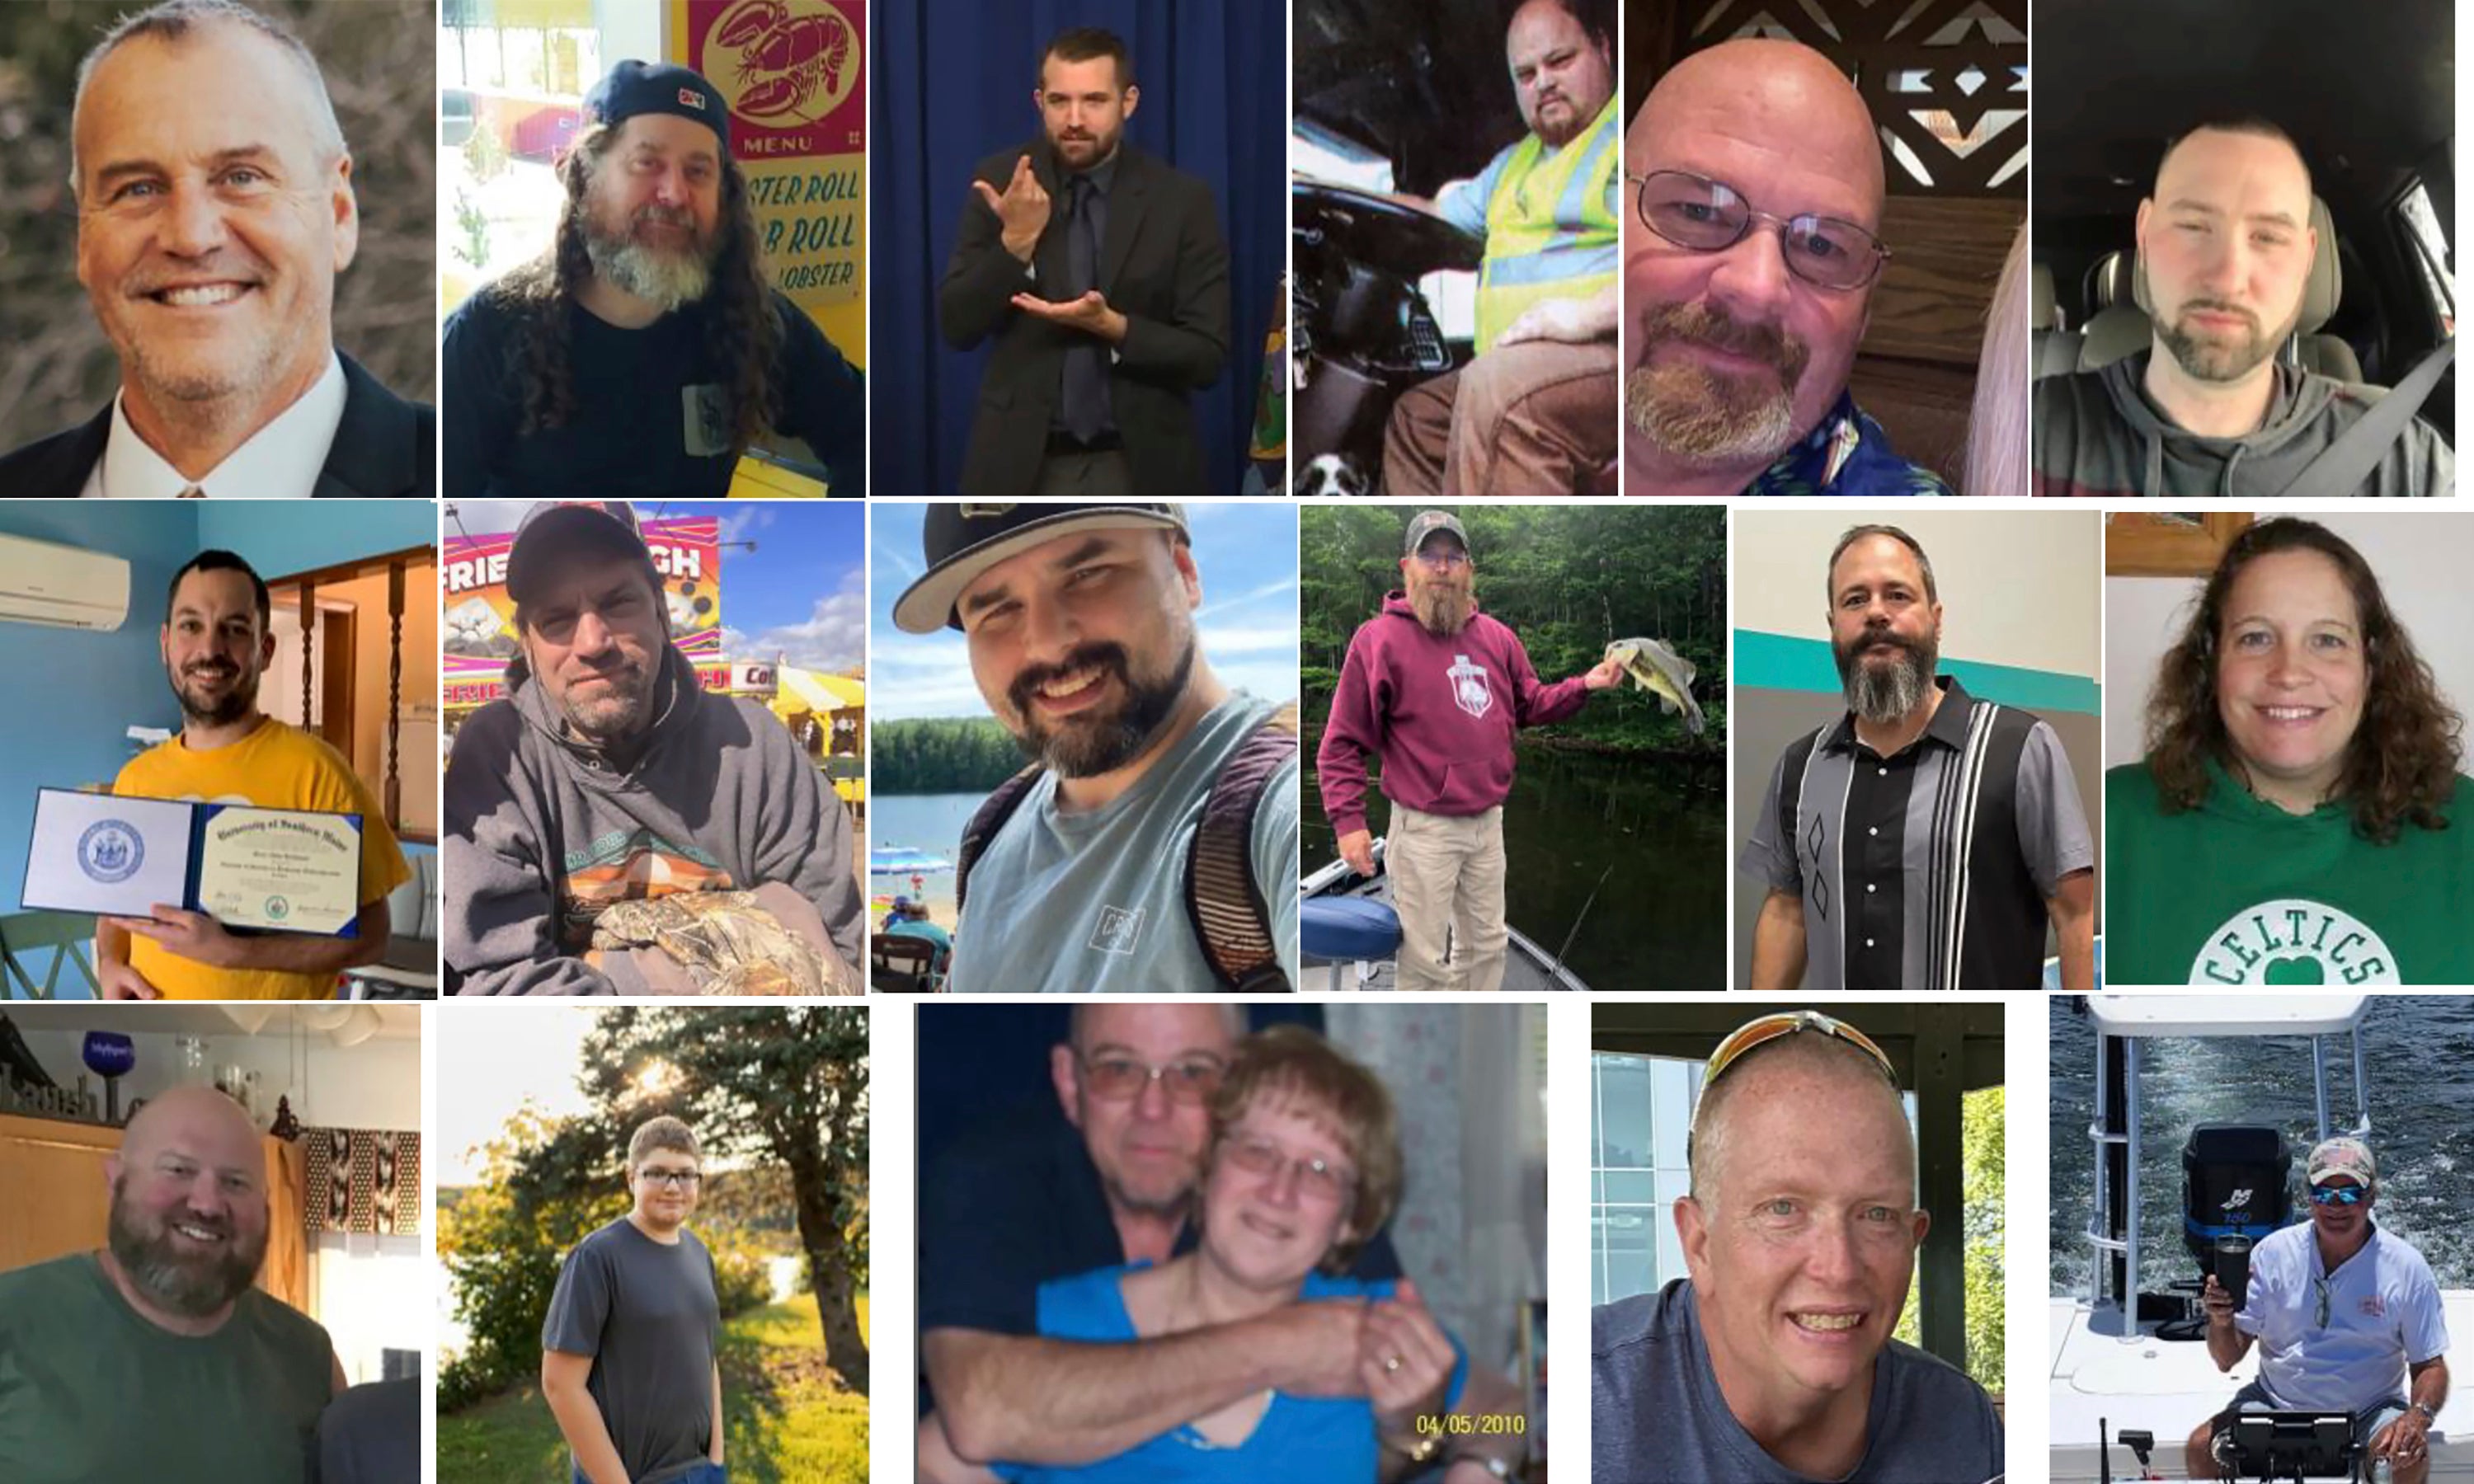 These photos provided by the Maine Department of Public Safety shows victims of the Maine shooting